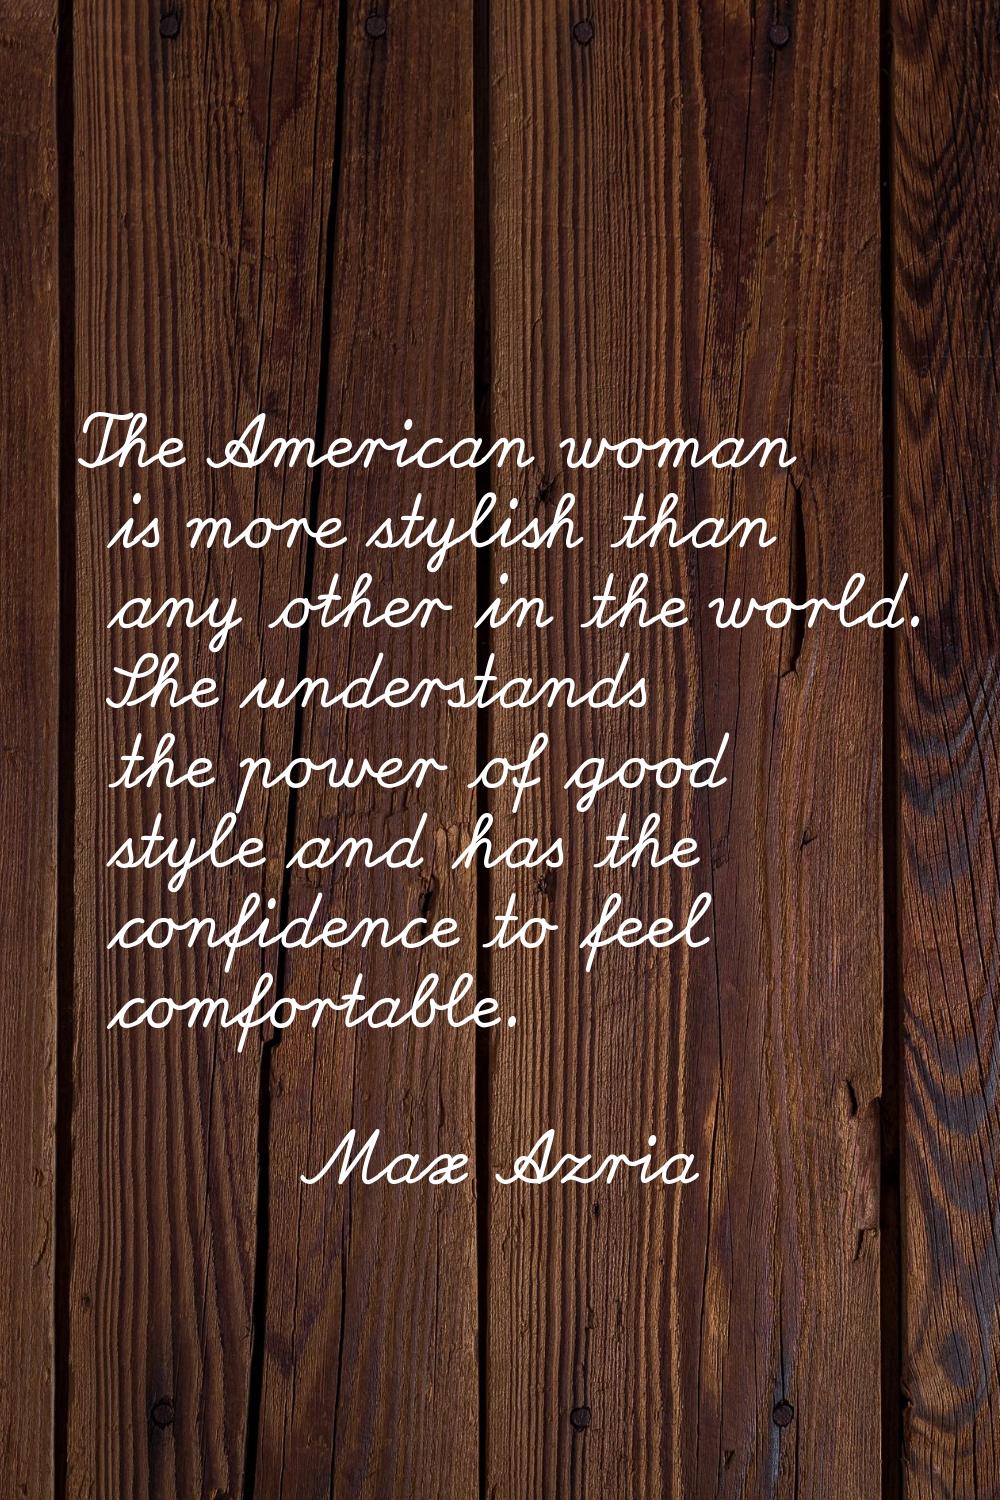 The American woman is more stylish than any other in the world. She understands the power of good s